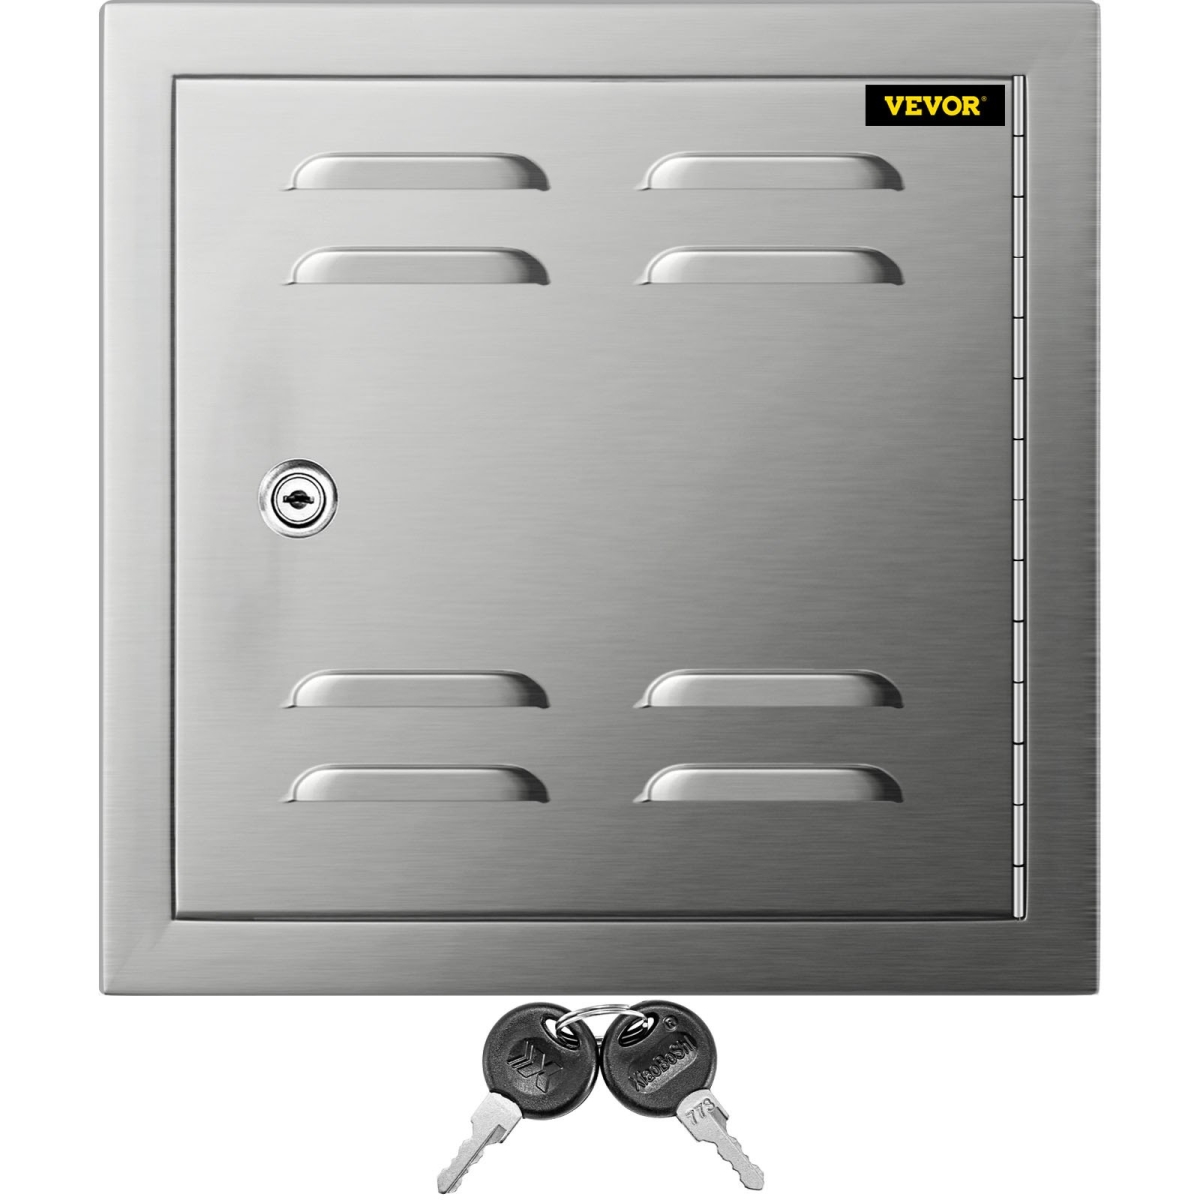 Picture of Vevor BXGCGM30412W12H01V0 12 x 12 in. Vented Access Door Single Access Door with Vents